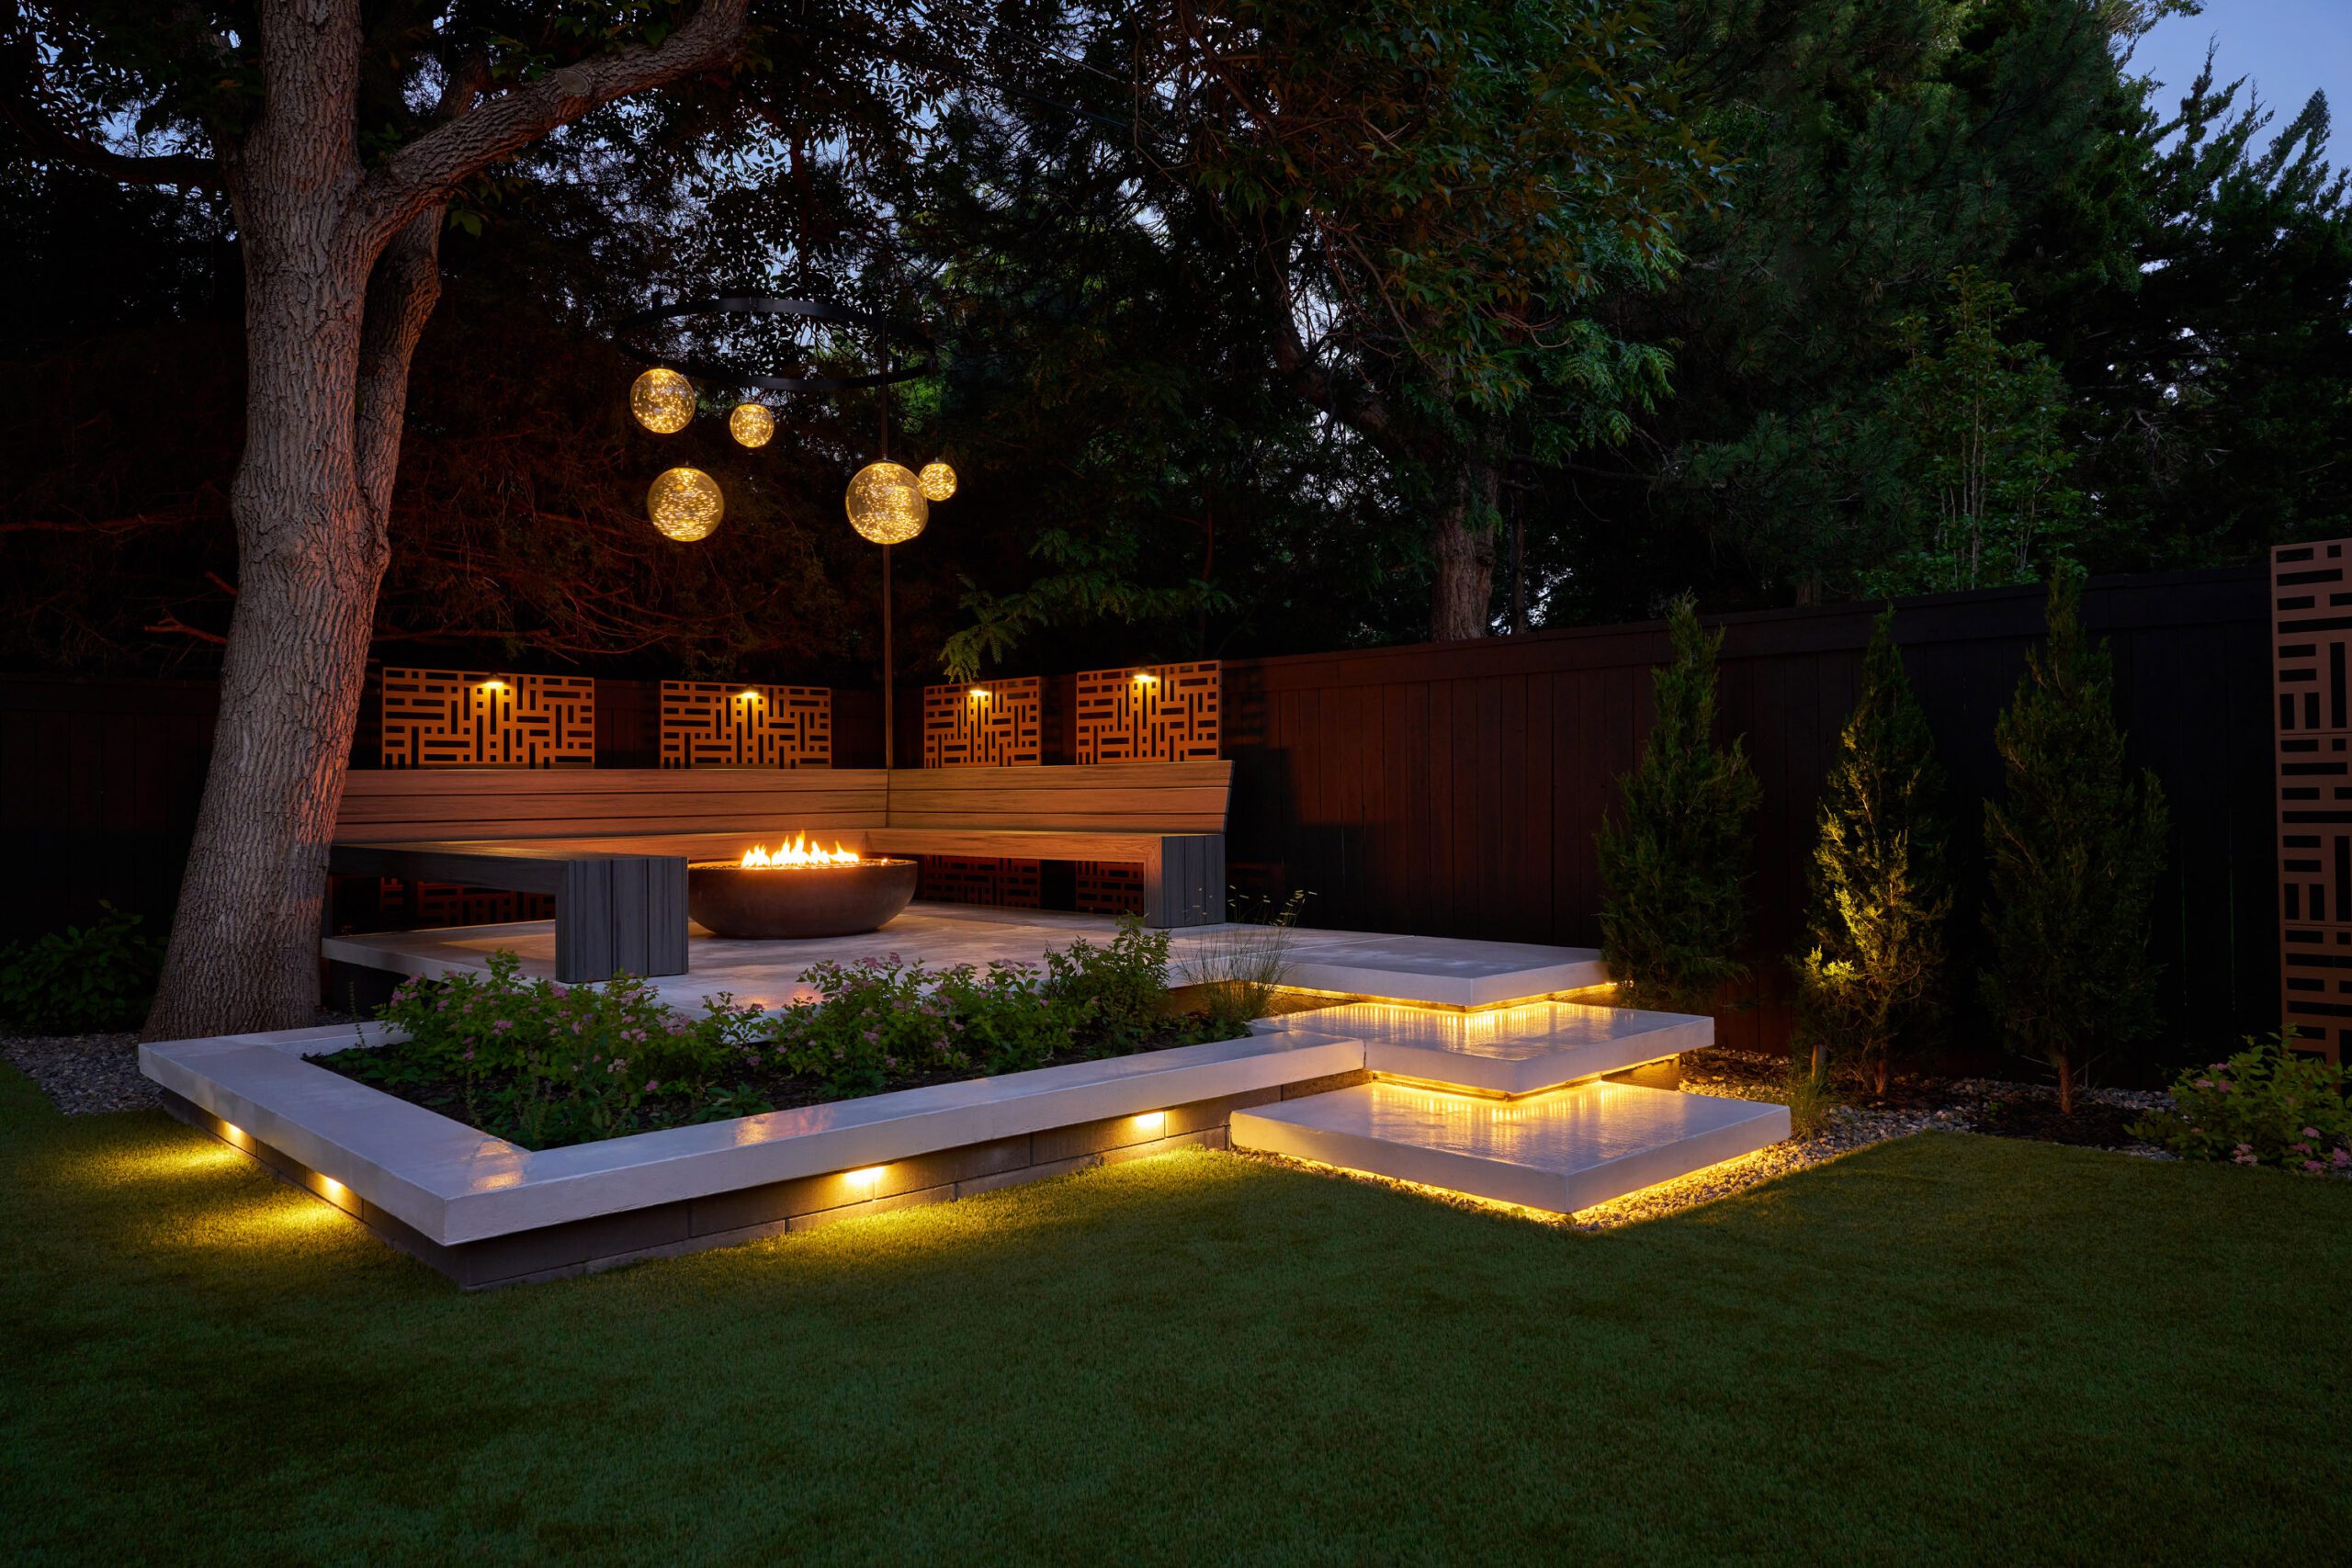 Landscape design with patio and outdoor lighting in Greenwood Village, Colorado